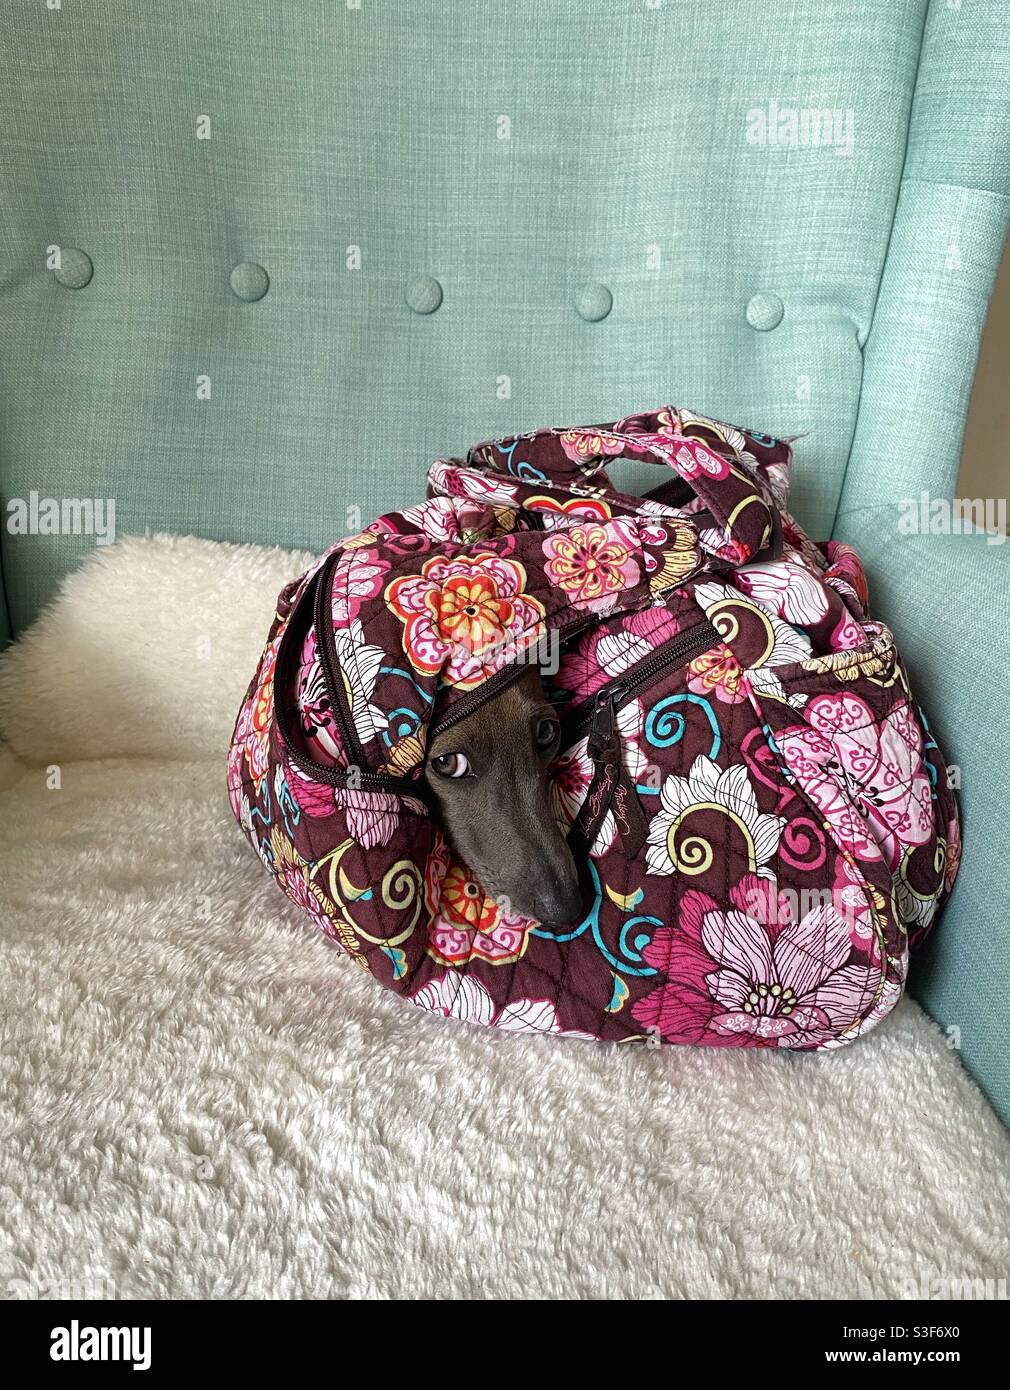 Curly Italian greyhound in a bag Stock Photo